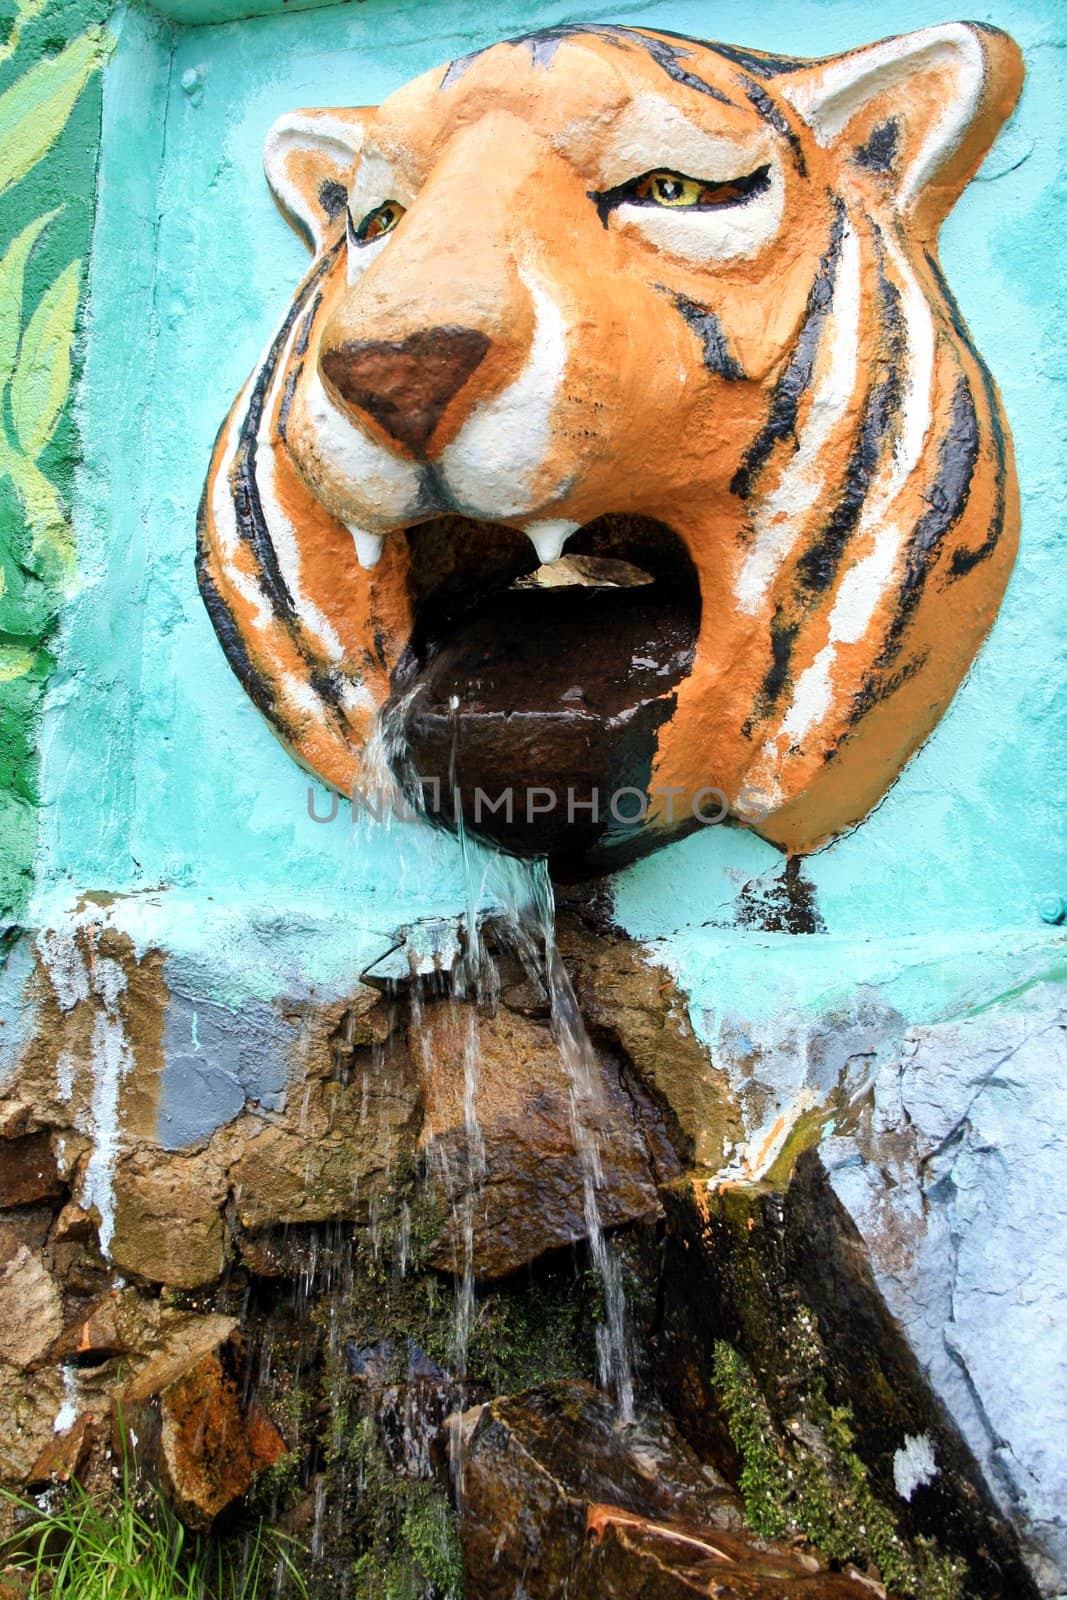 Water flows from a mouth of a stone tiger